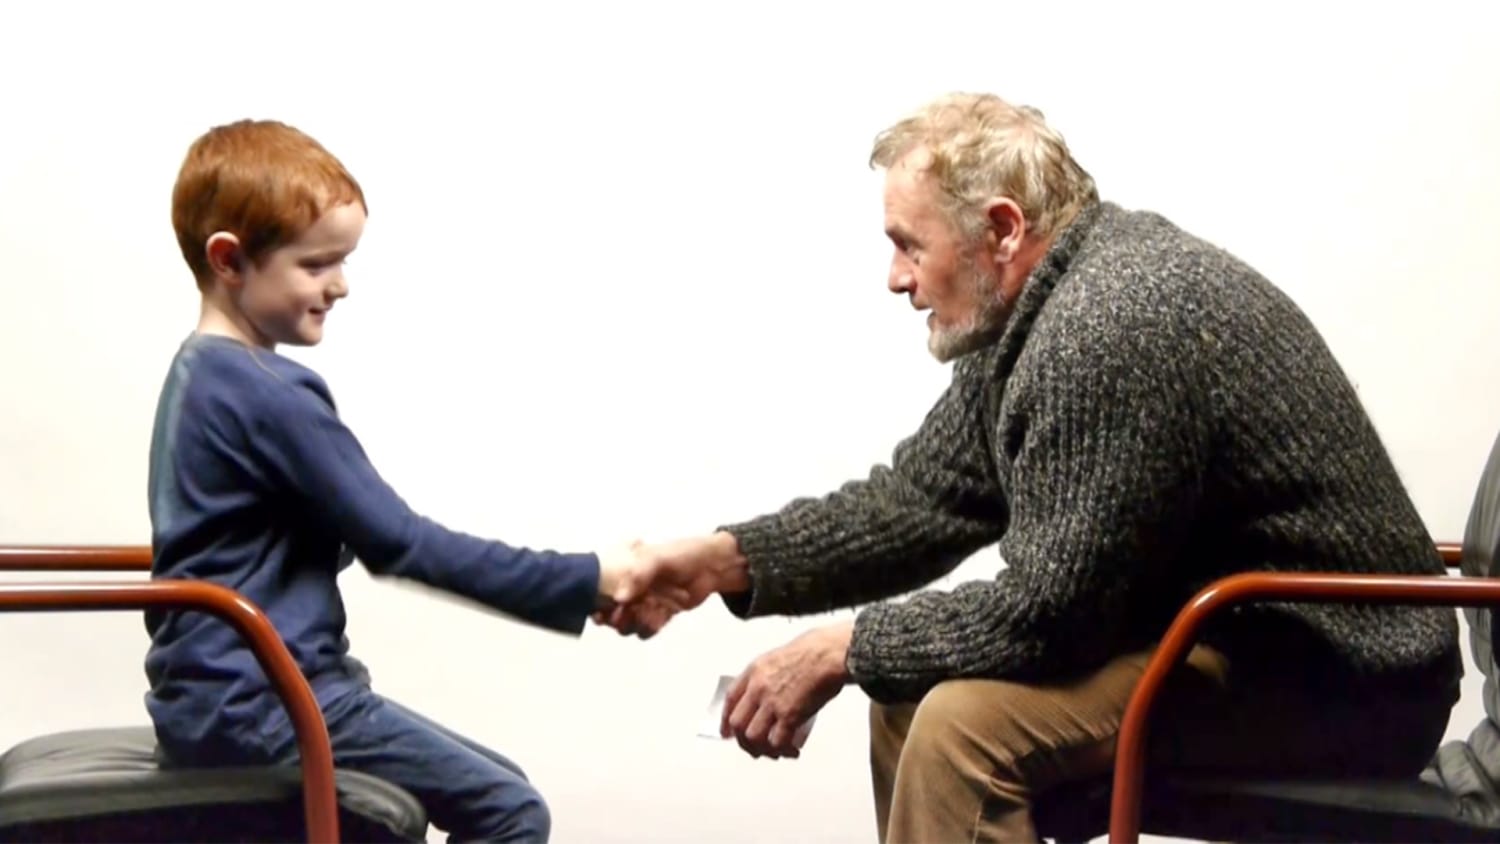 Man and boy, separated by 57 years in age, answer life's questions in sweet video